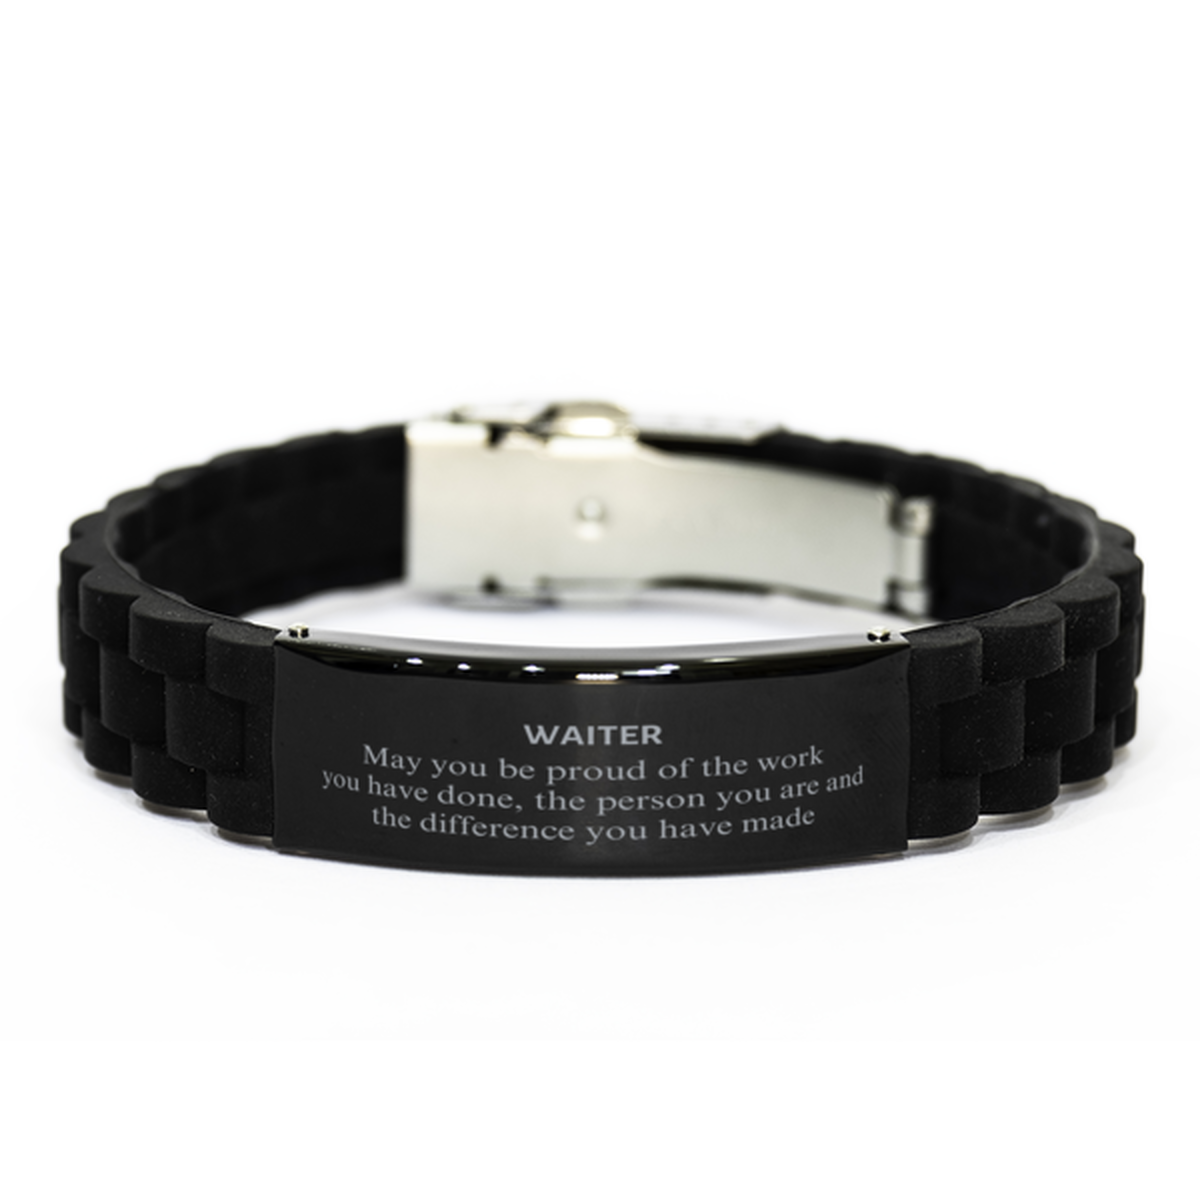 Waiter May you be proud of the work you have done, Retirement Waiter Black Glidelock Clasp Bracelet for Colleague Appreciation Gifts Amazing for Waiter